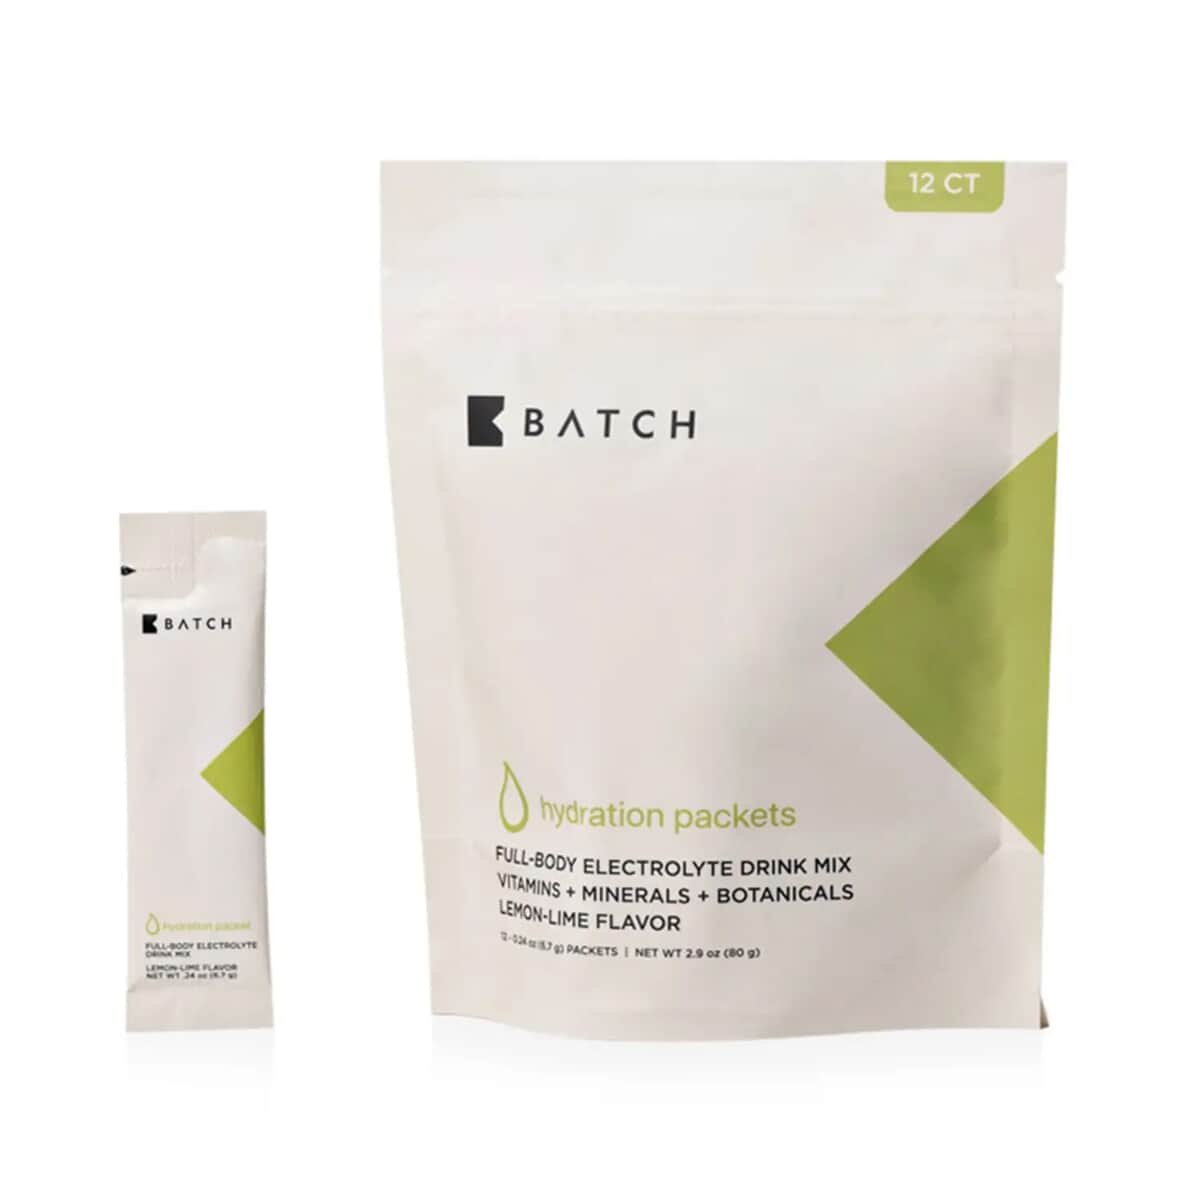 Batch Hydration Packet Lemon Lime Flavor Full-Body Electrolyte Drink Mix 12 Pack (Ships in 3-5 Days) image number 0